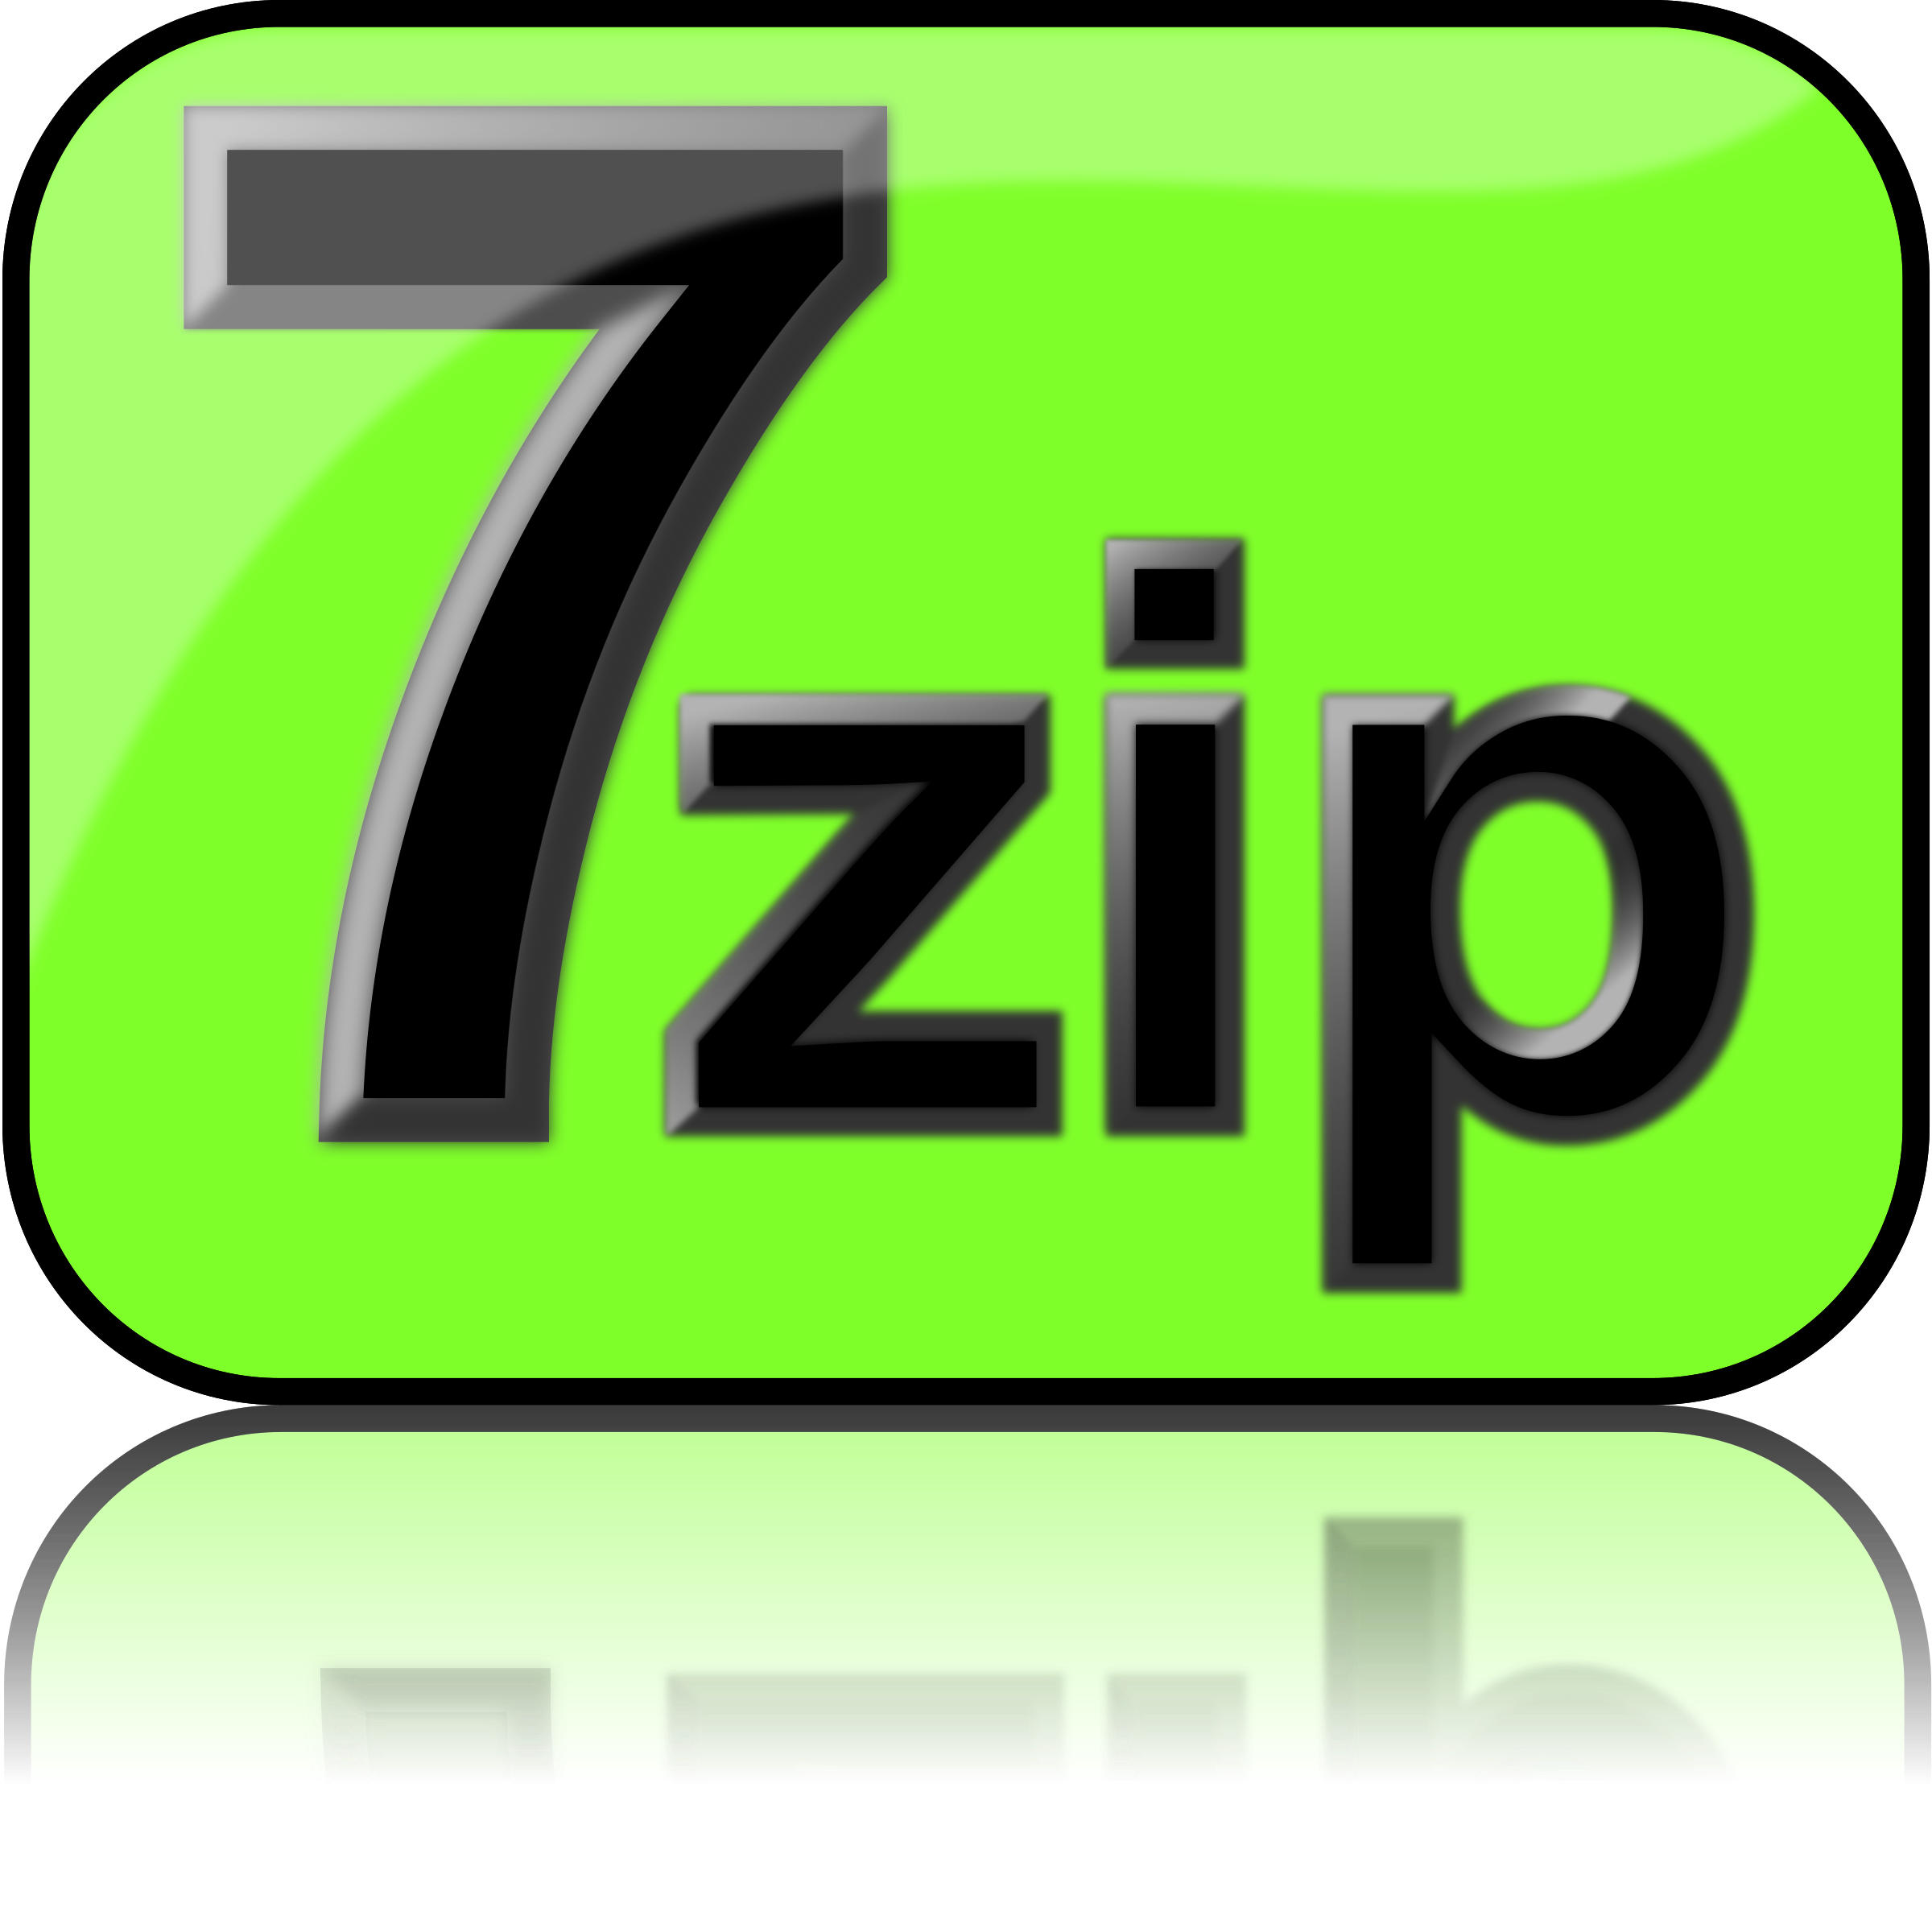 7zip Glossy Extrude Green SVG Clip arts